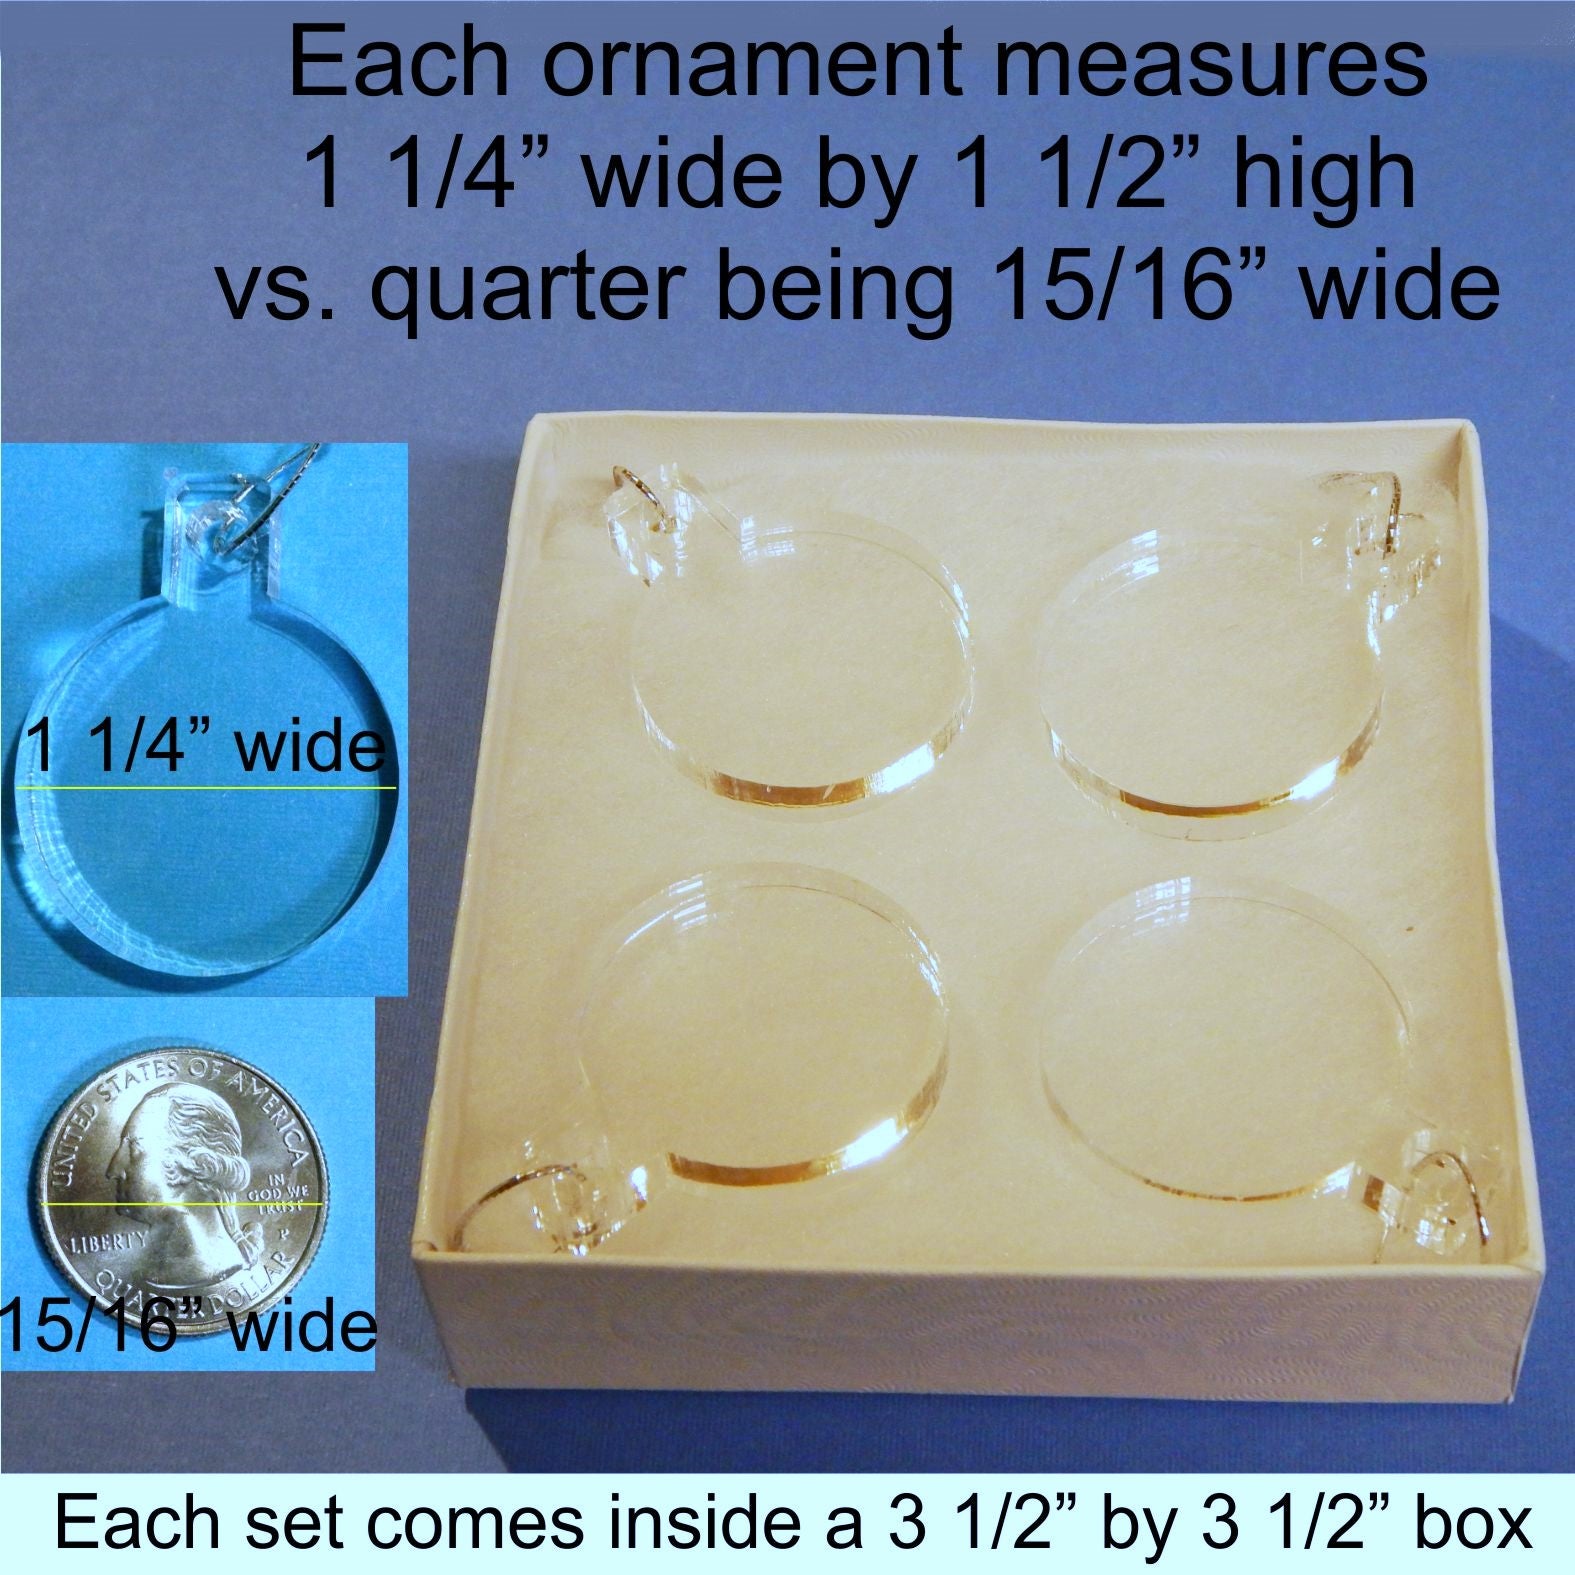 clear round ornament place above a quarter to show dimensions and a white gift box holding 4 clear round ornaments